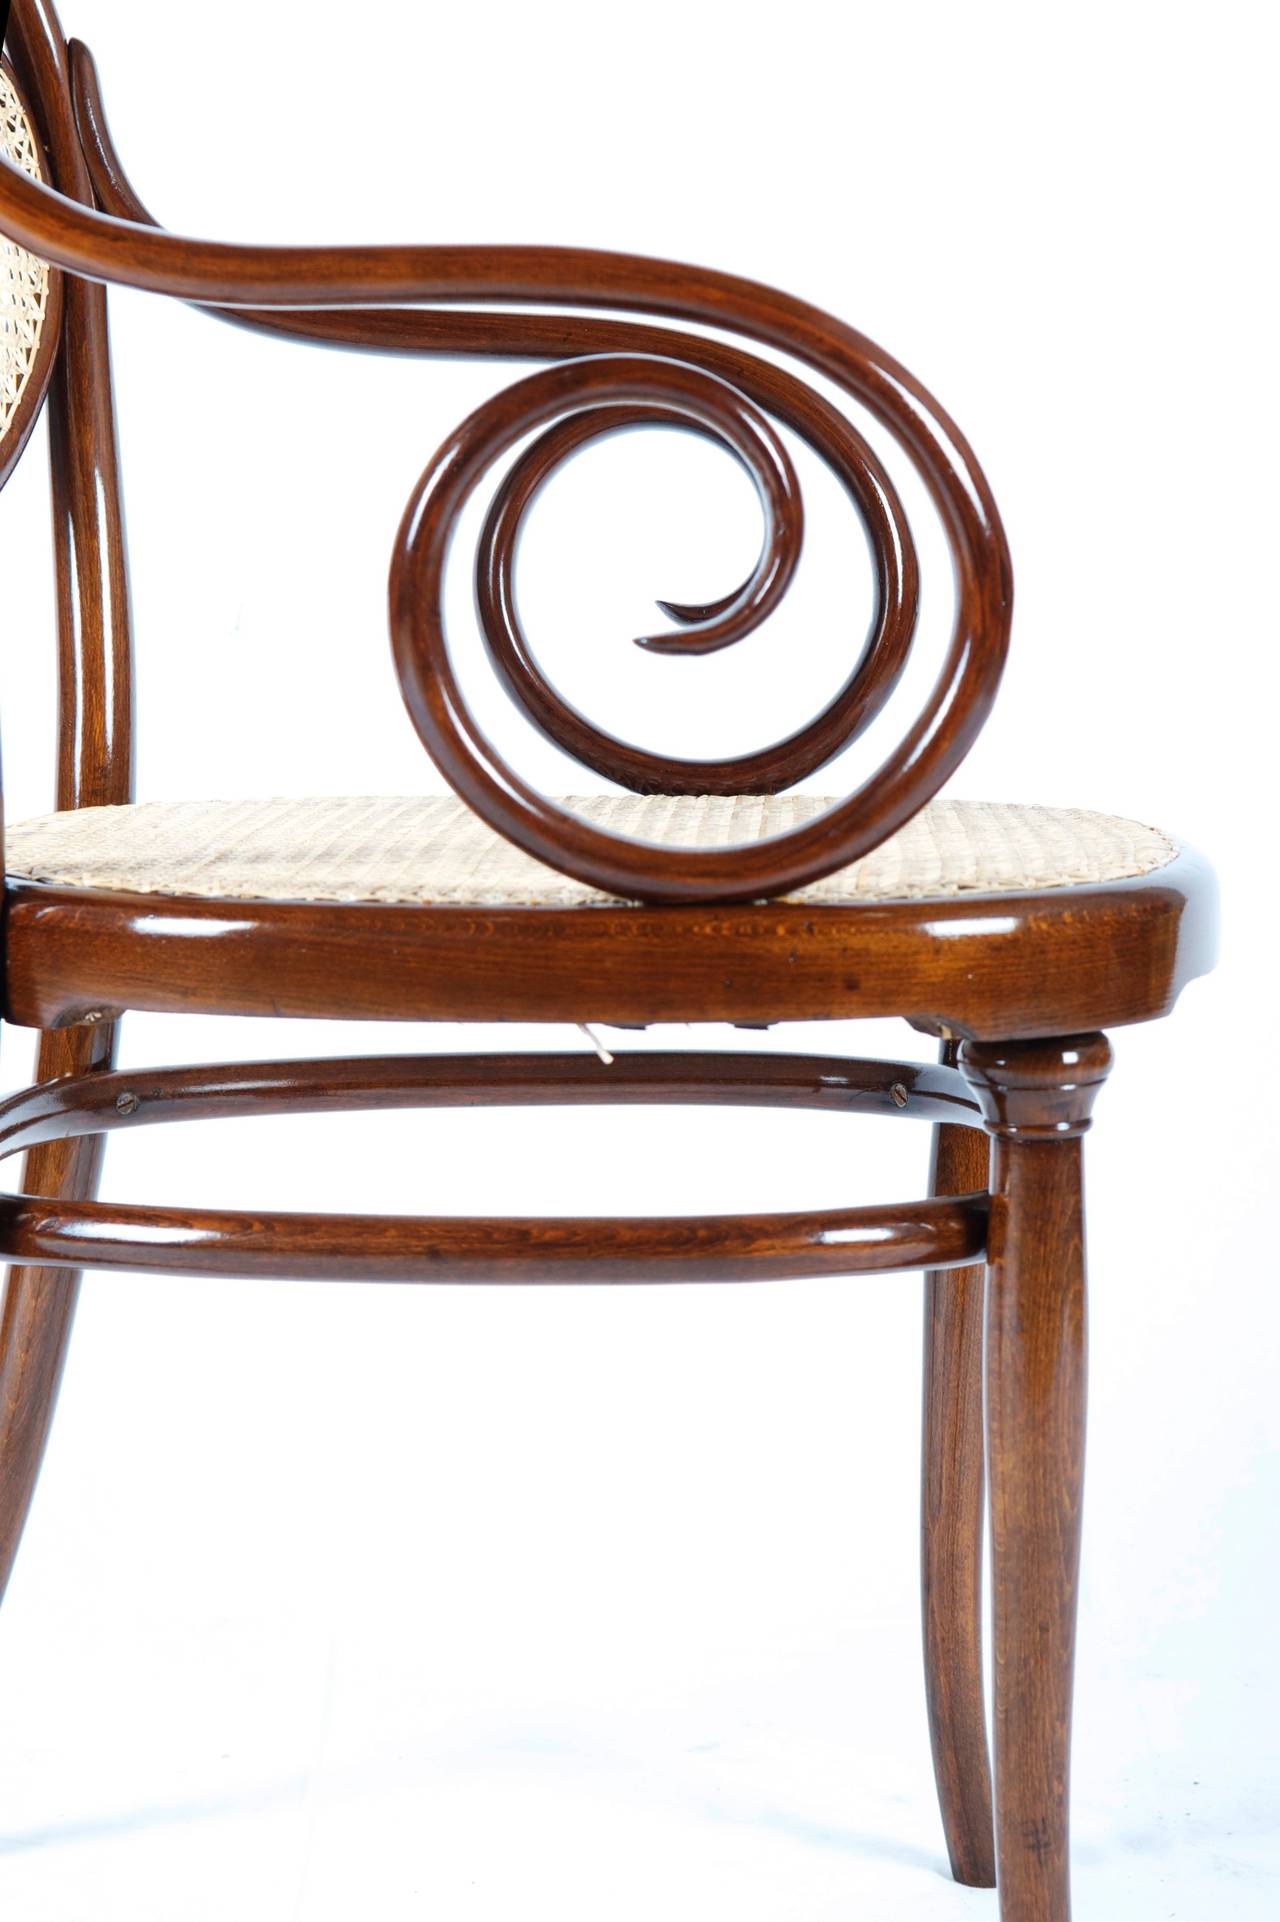 This beautiful Thonet bentwood armchair model no. 11. 
Completely restored.